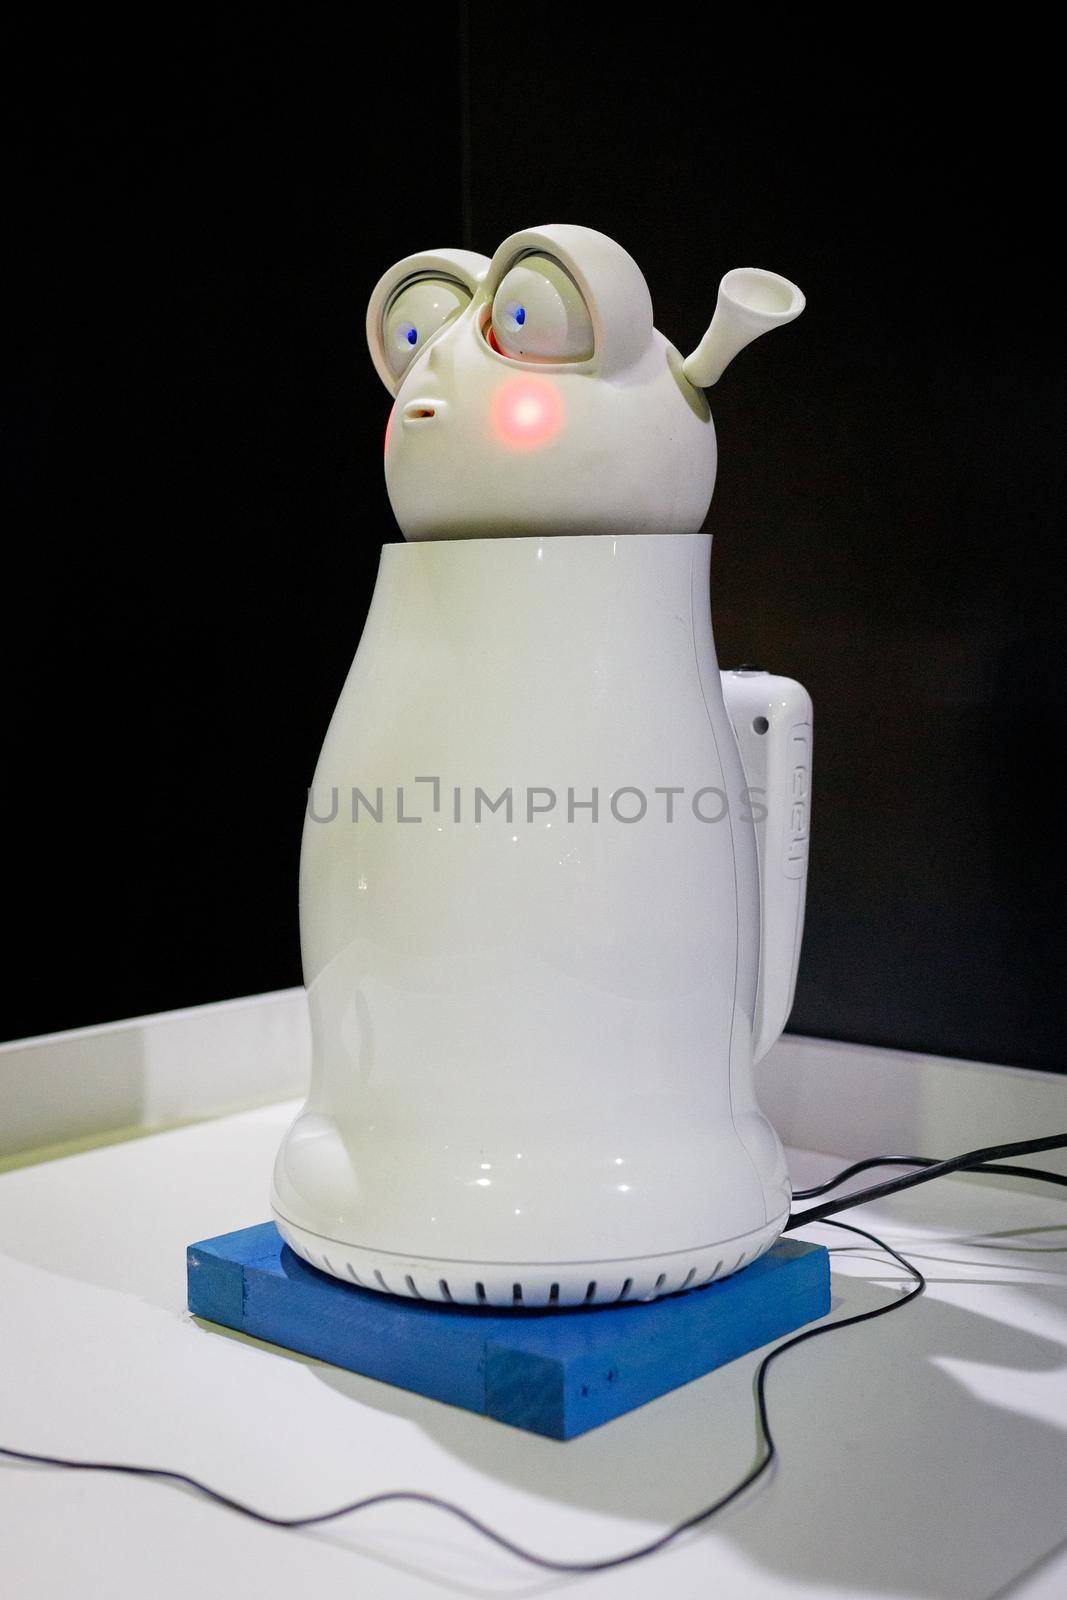 Emotional white robot, similar to an electric kettle, at the exhibition of robots by Rom4ek